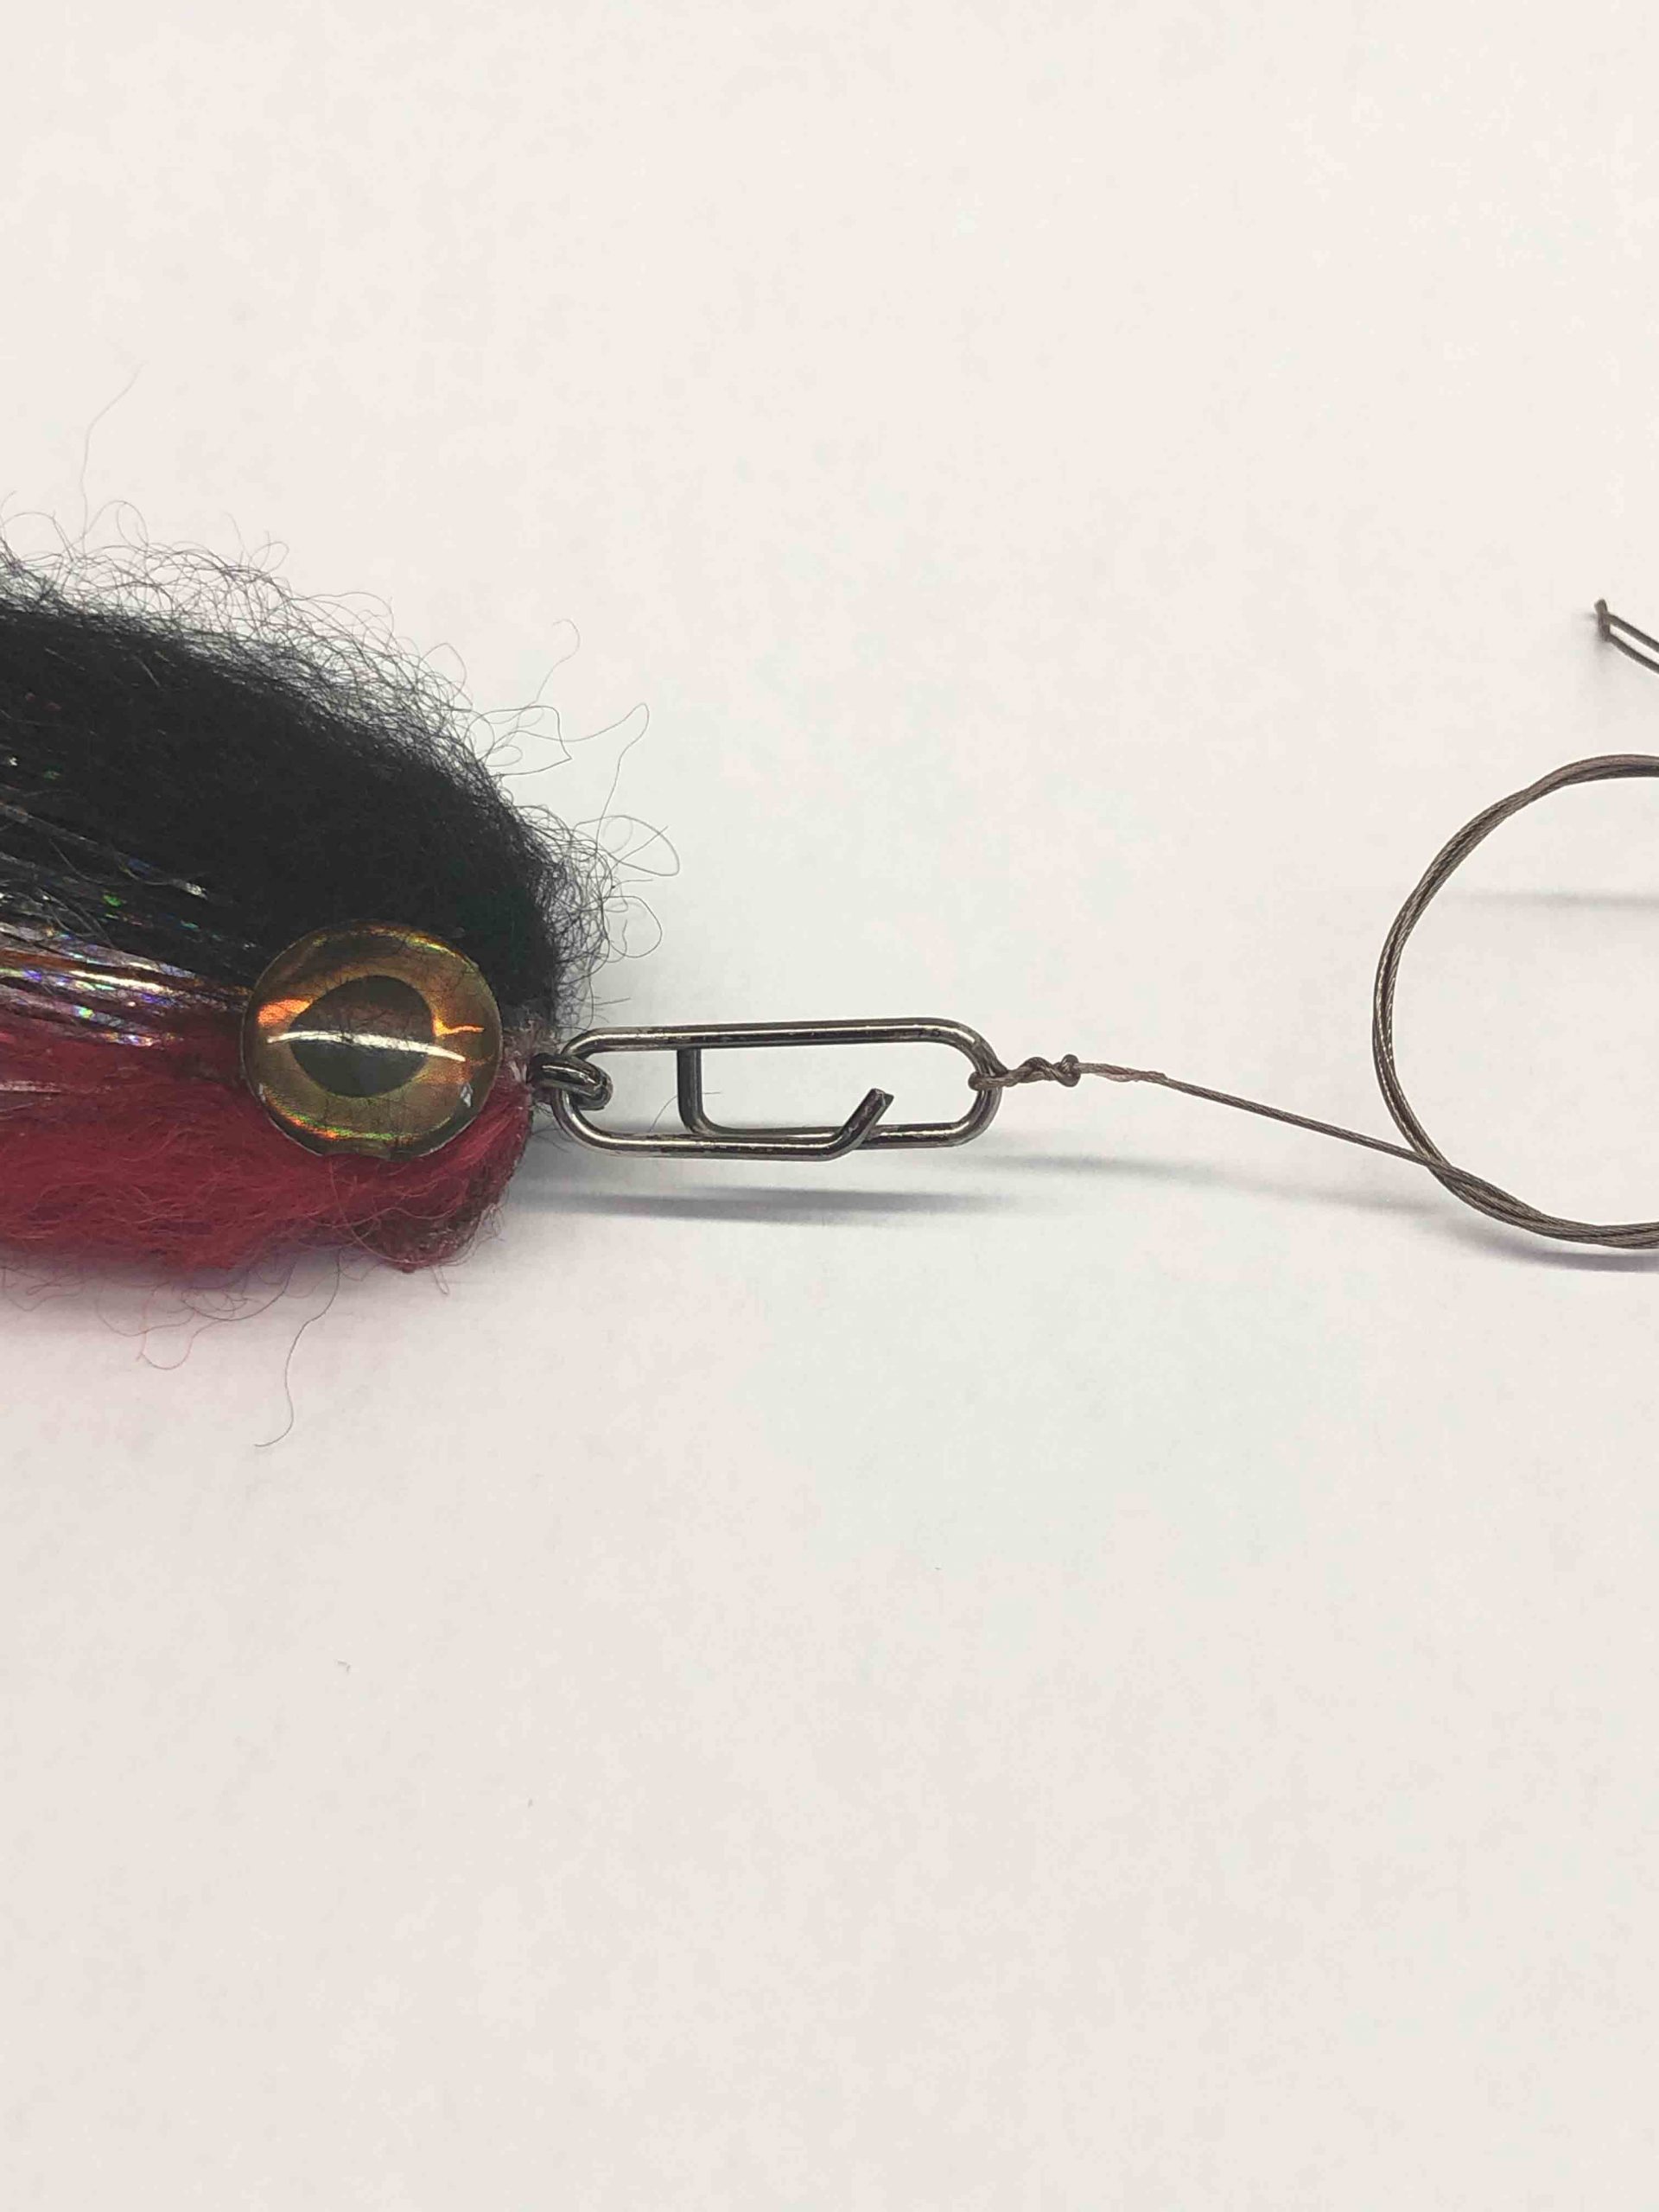 Breakaway Mini Link lure clip - does a lure clip get much better